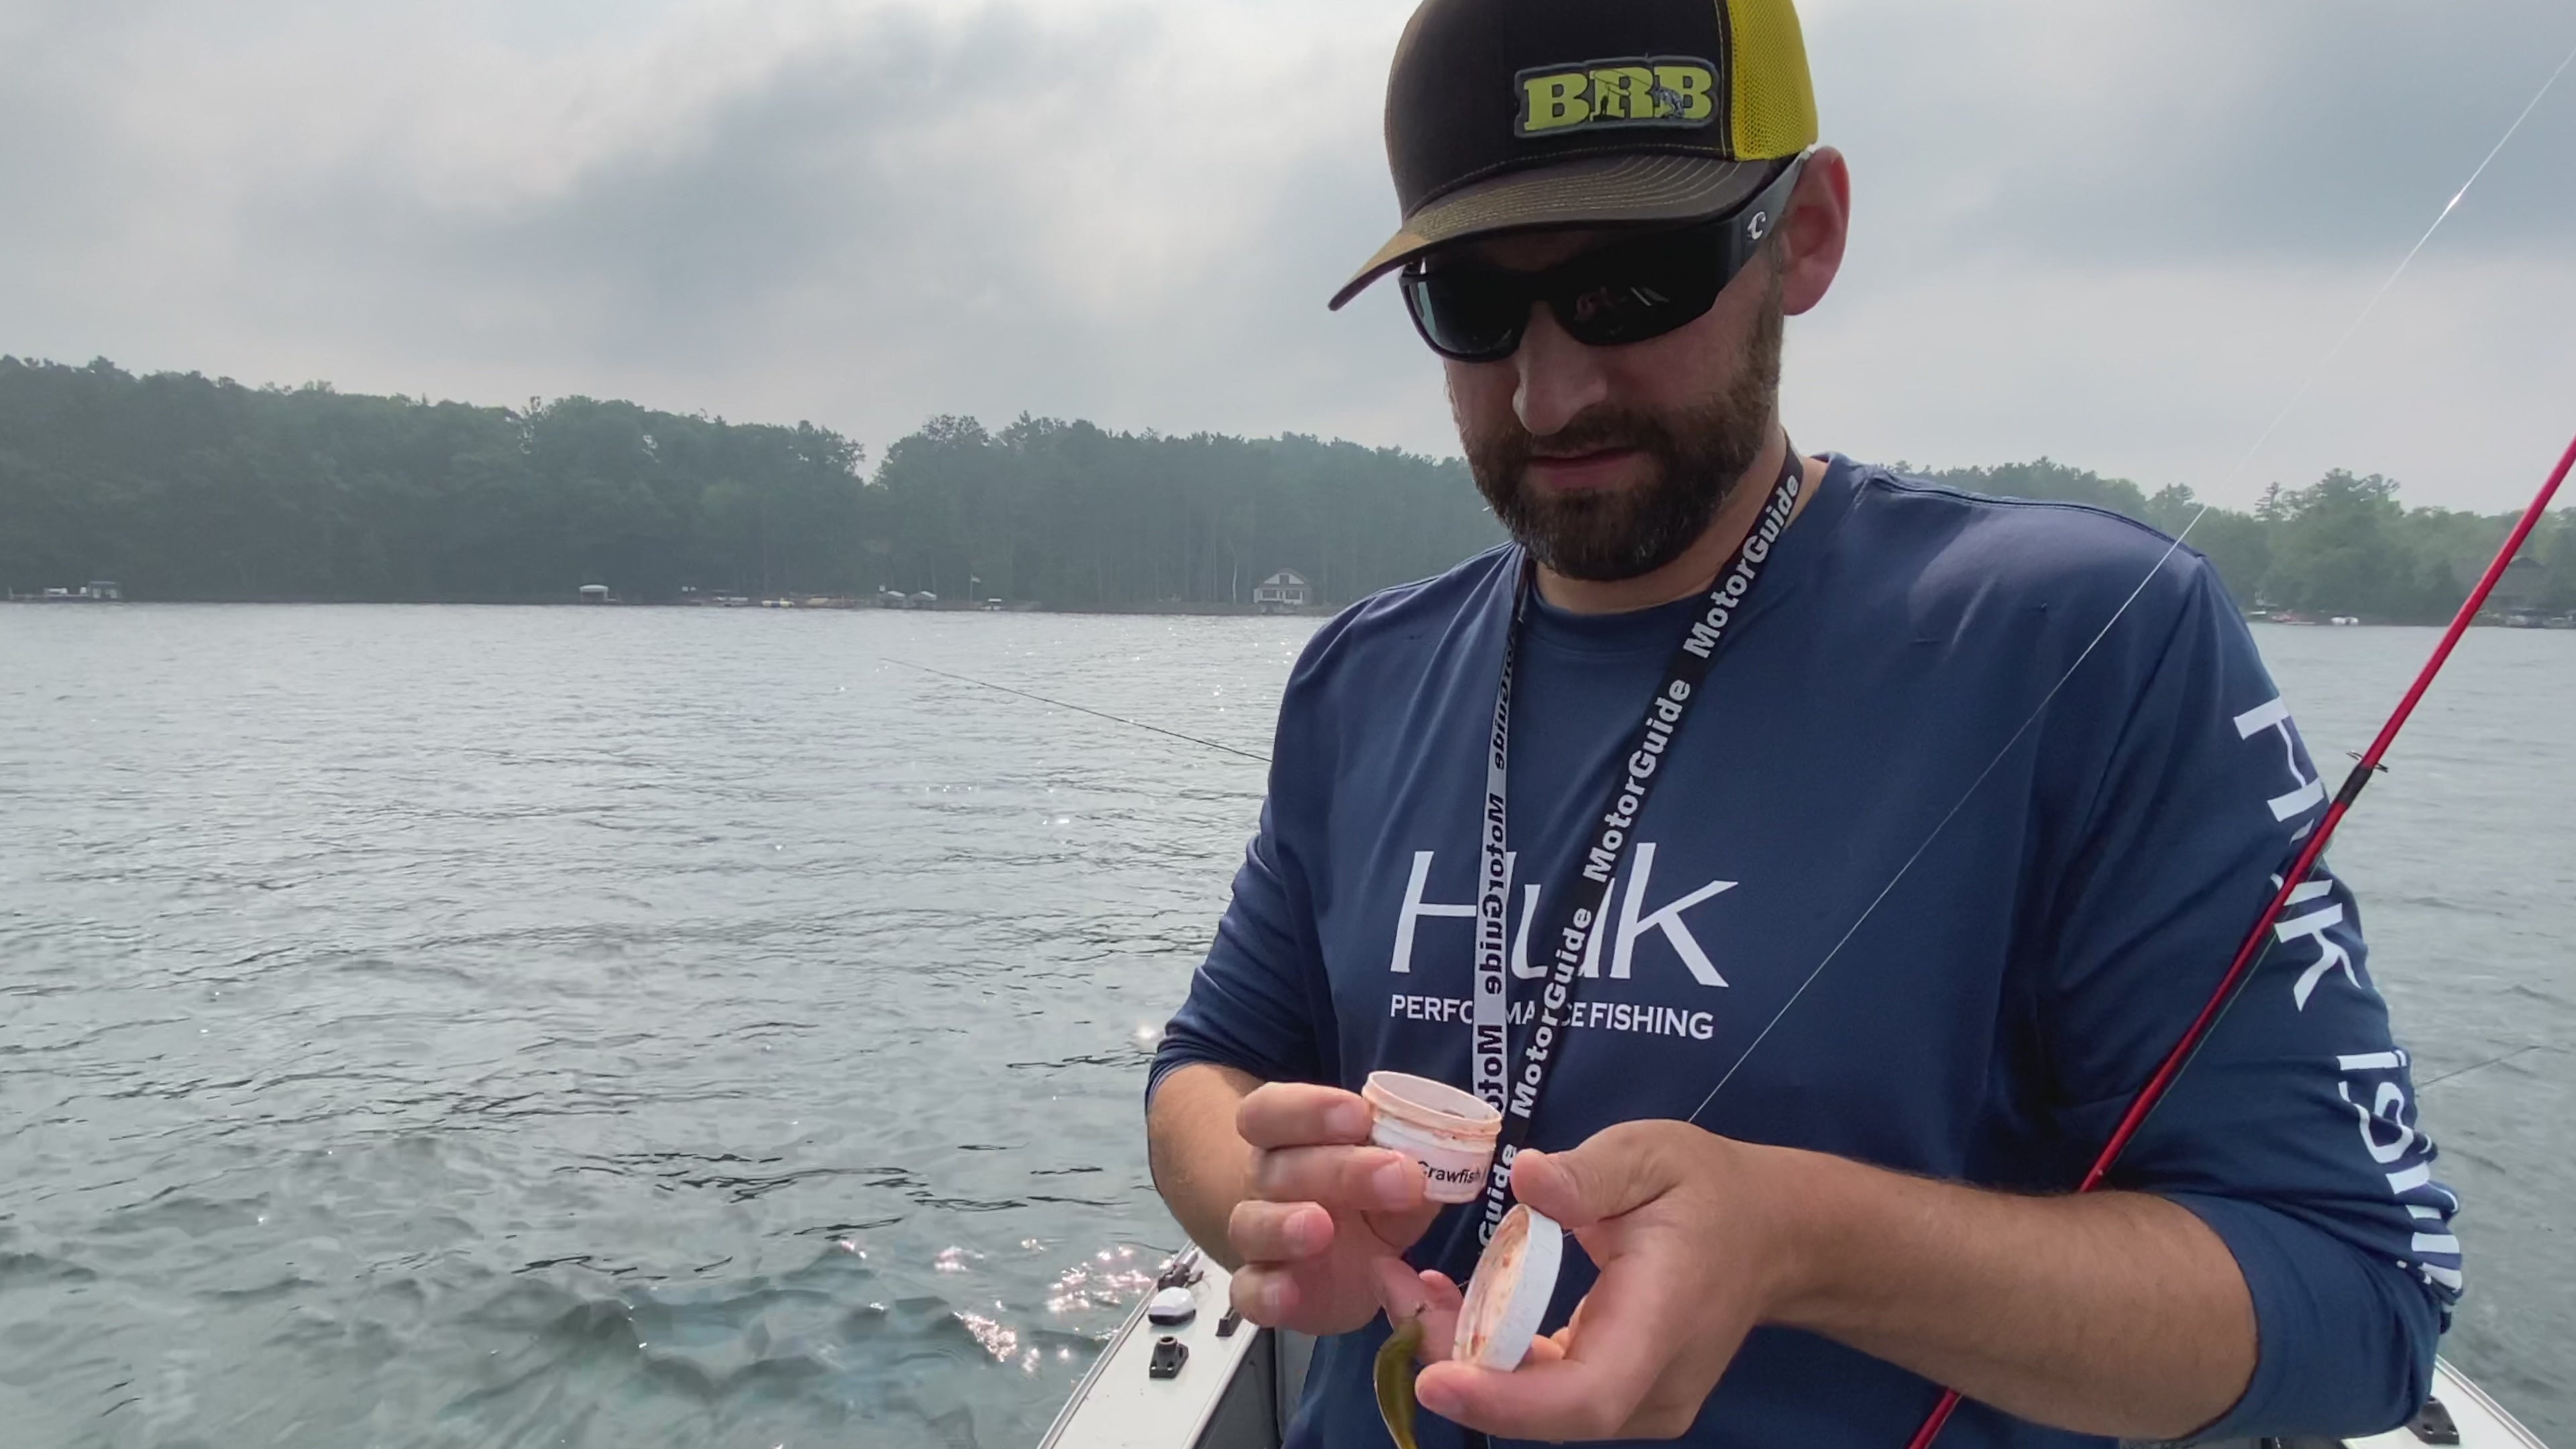 Load video: How to Use BillyRub Plastics with BillyRub Scents to Catch More Fish